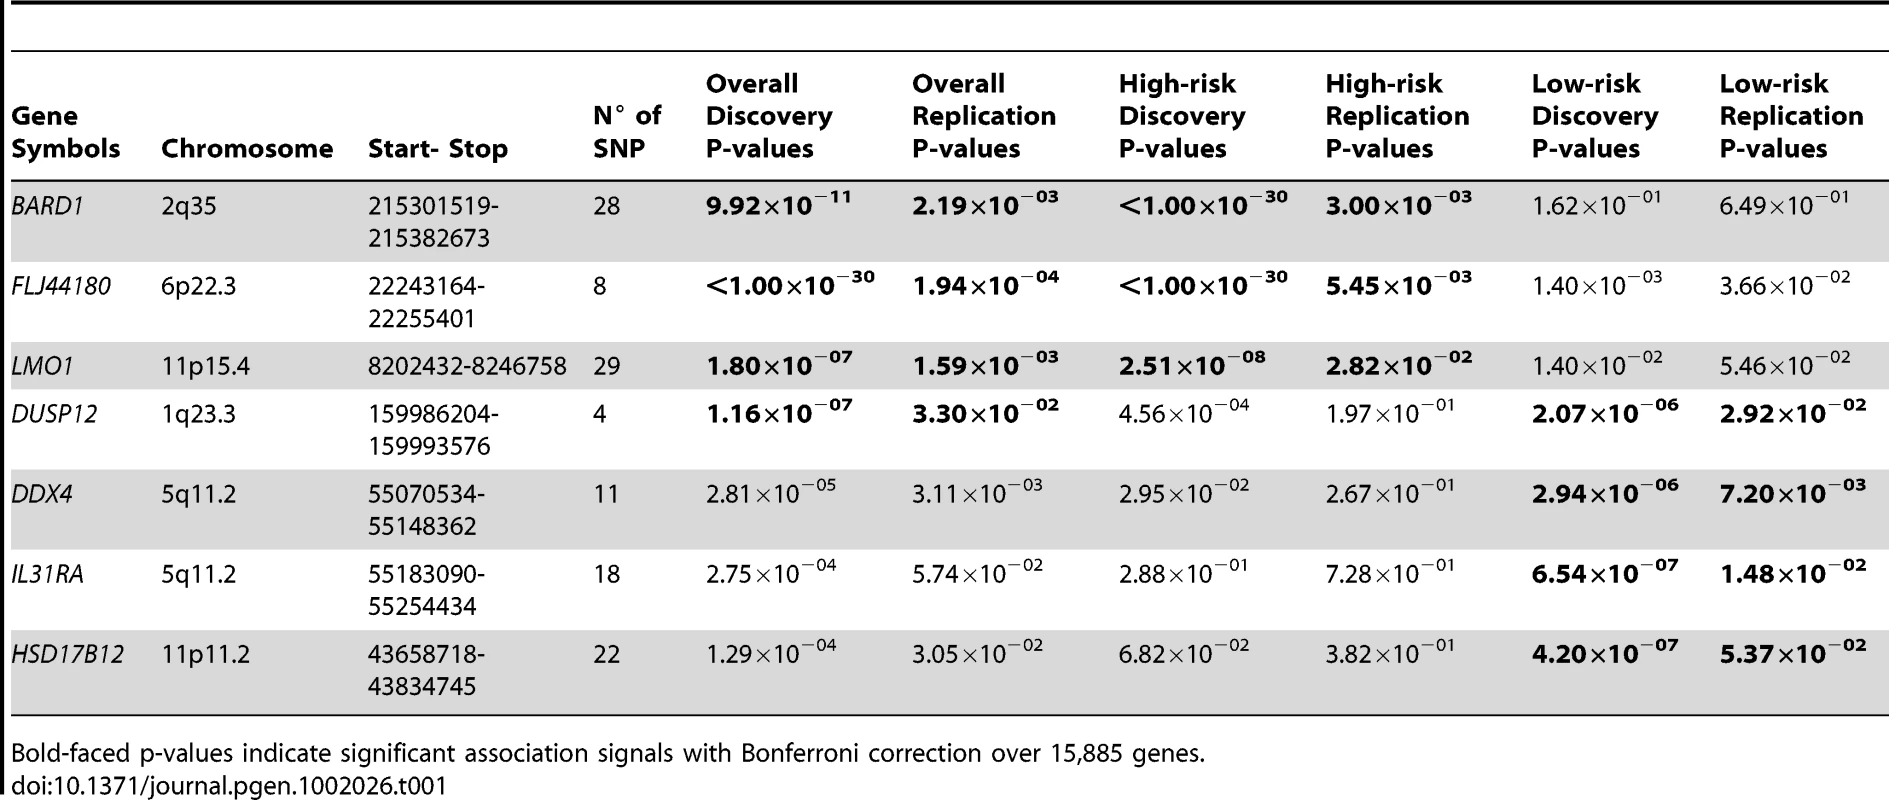 Summary of gene-centric analysis results for different phenotypic neuroblastomas.